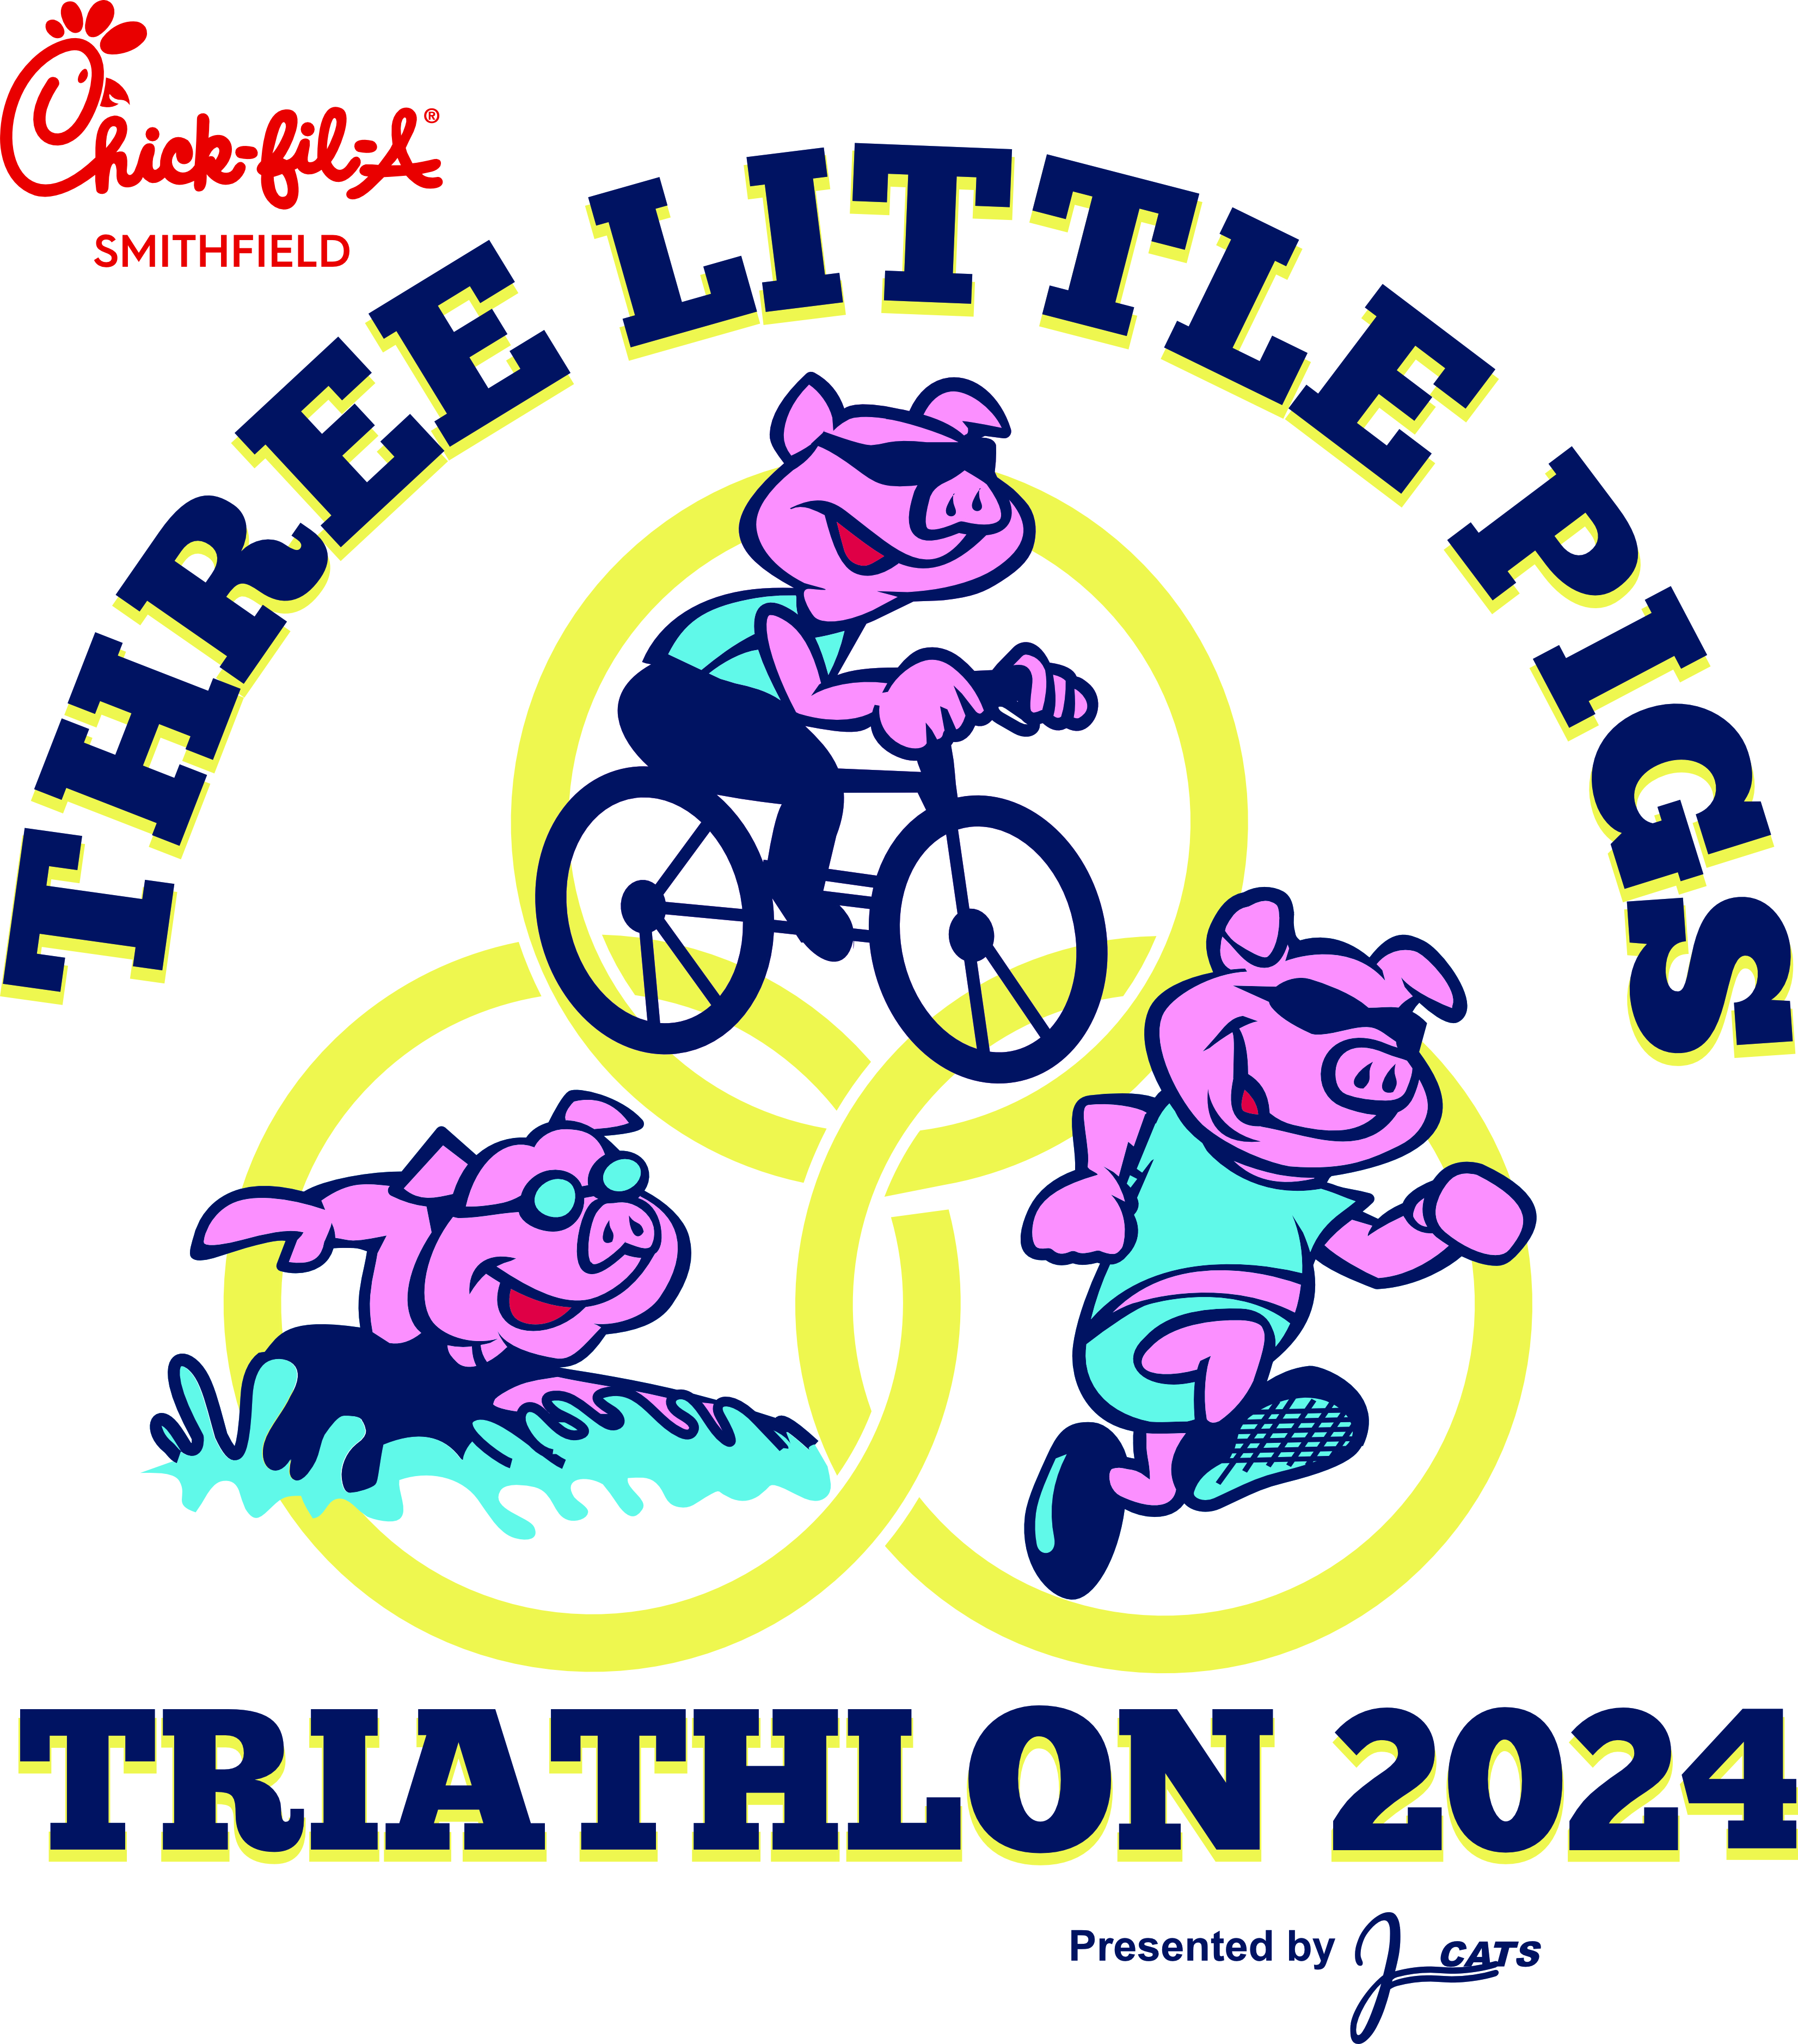 Chick-Fil-A 3 Little Pigs Triathlon presented by JCats